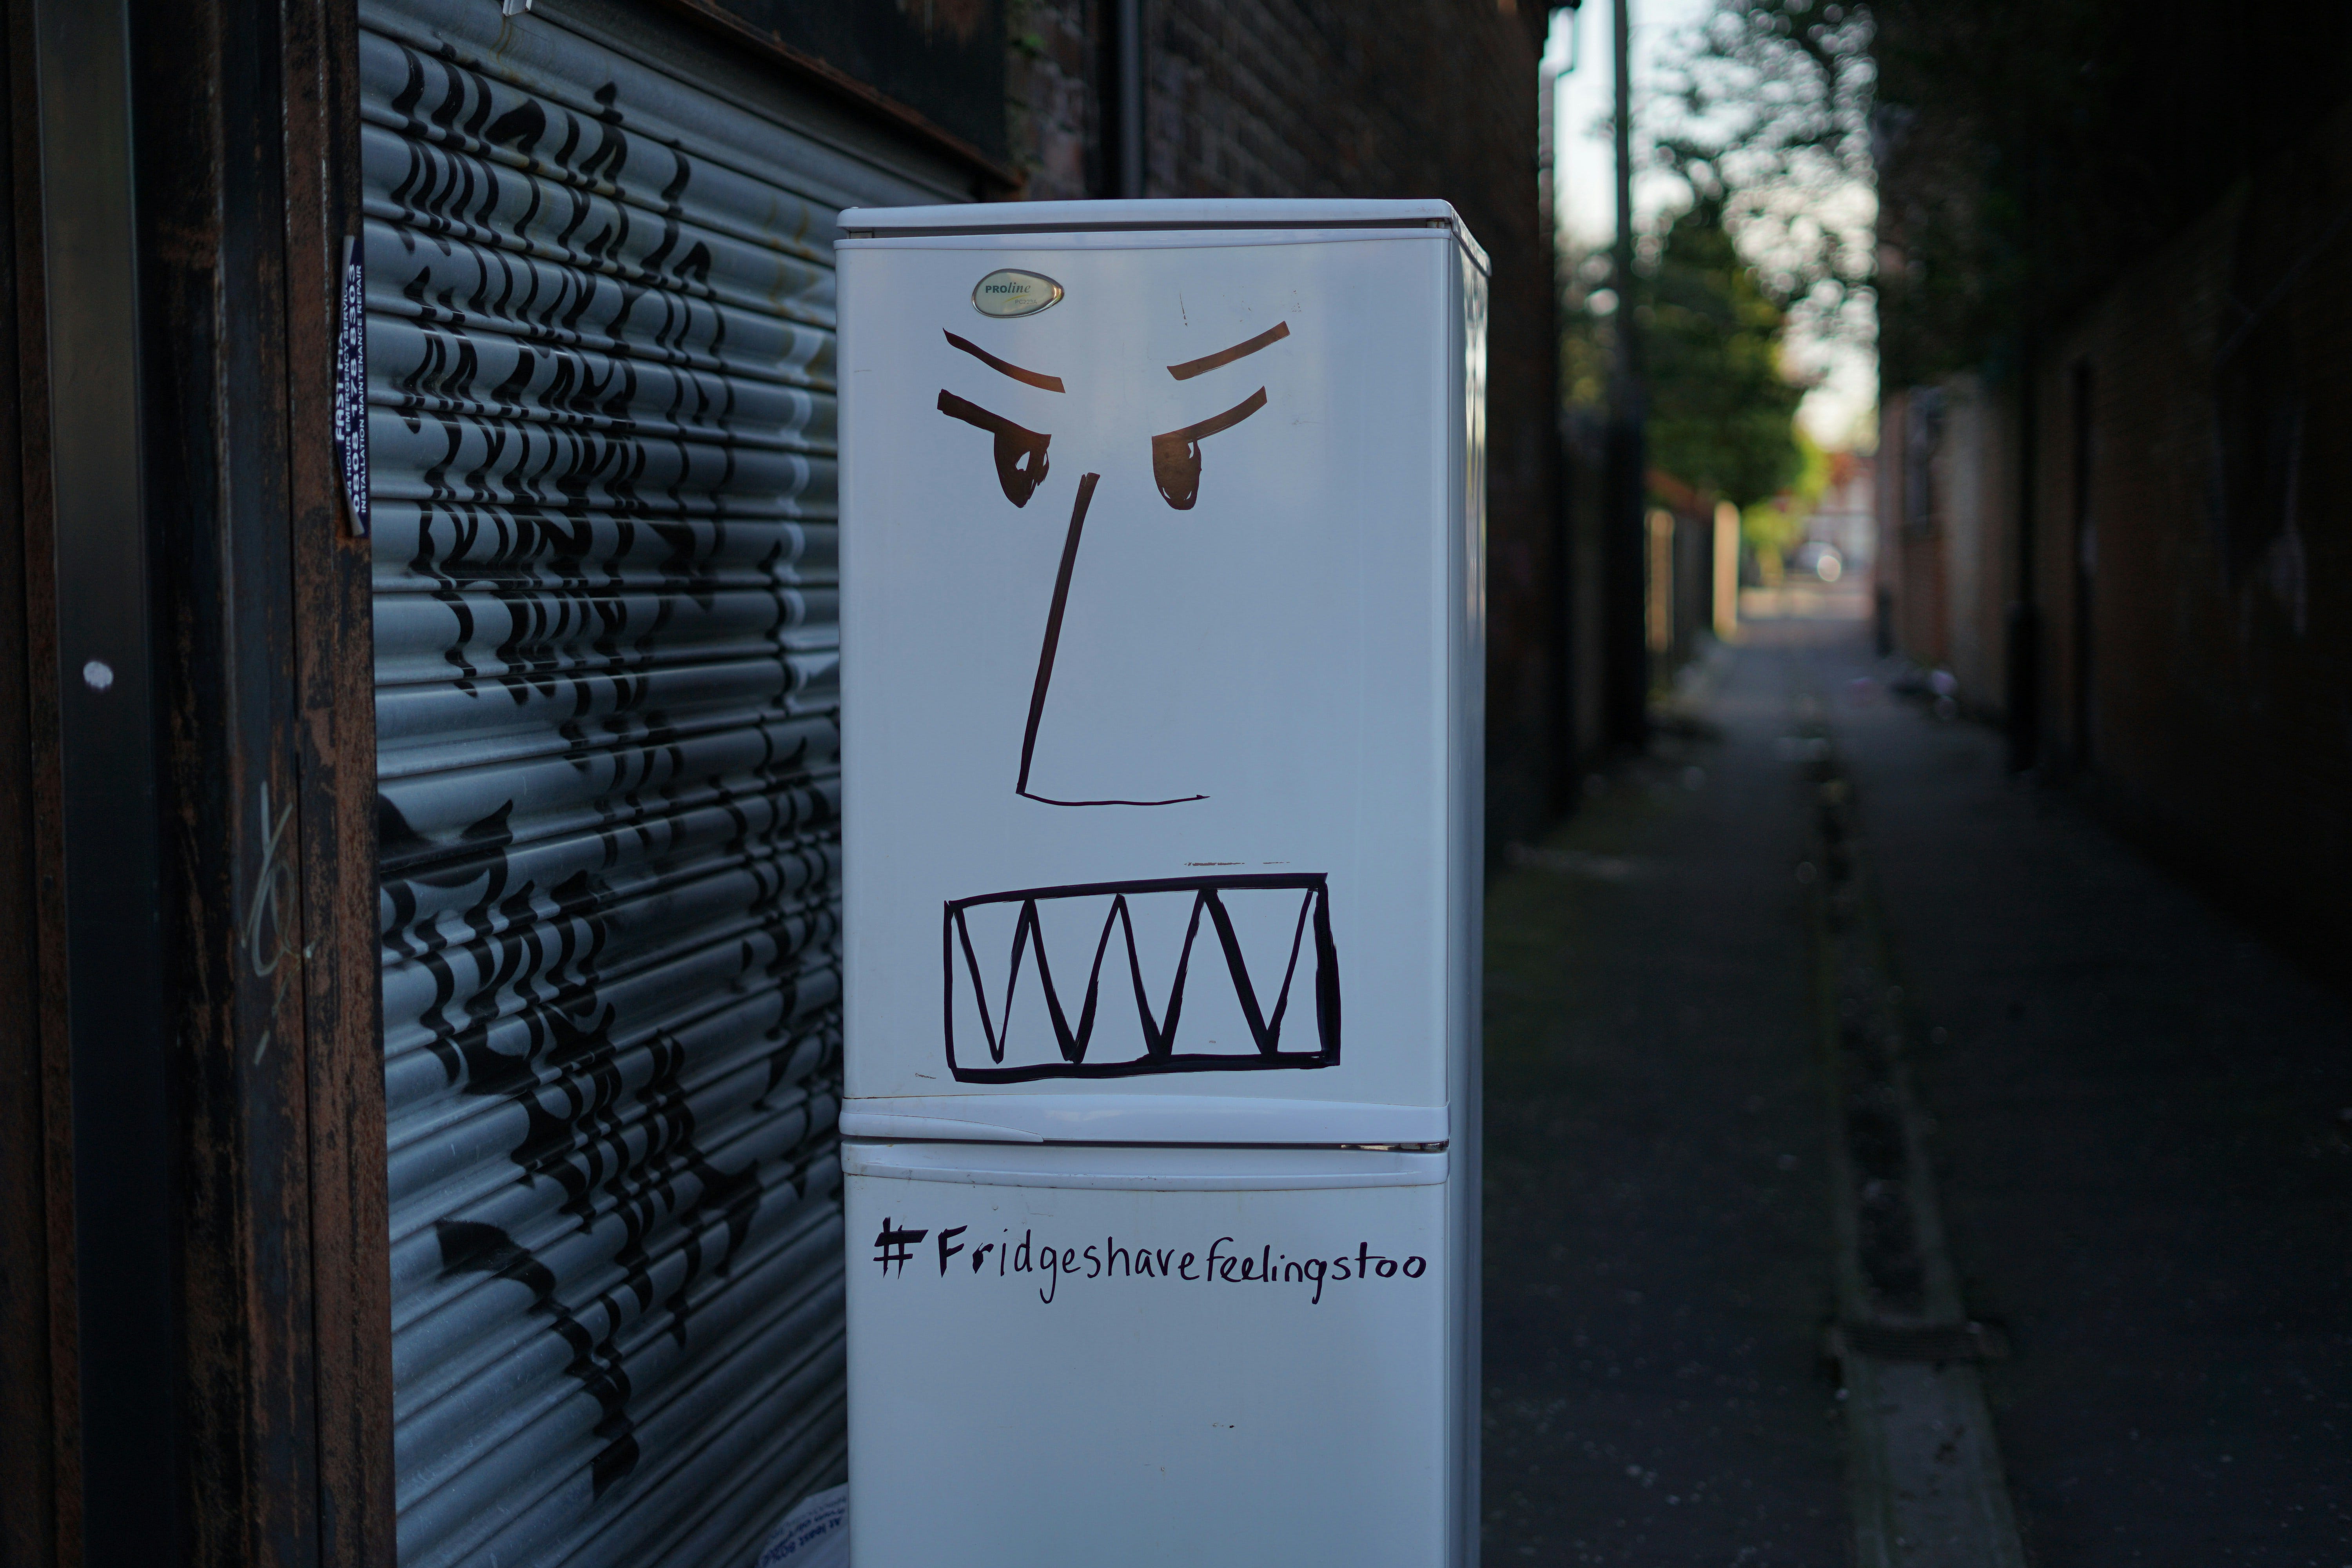 Image of a Refridgeraor with an angry face drawn on it in Sharpie marker